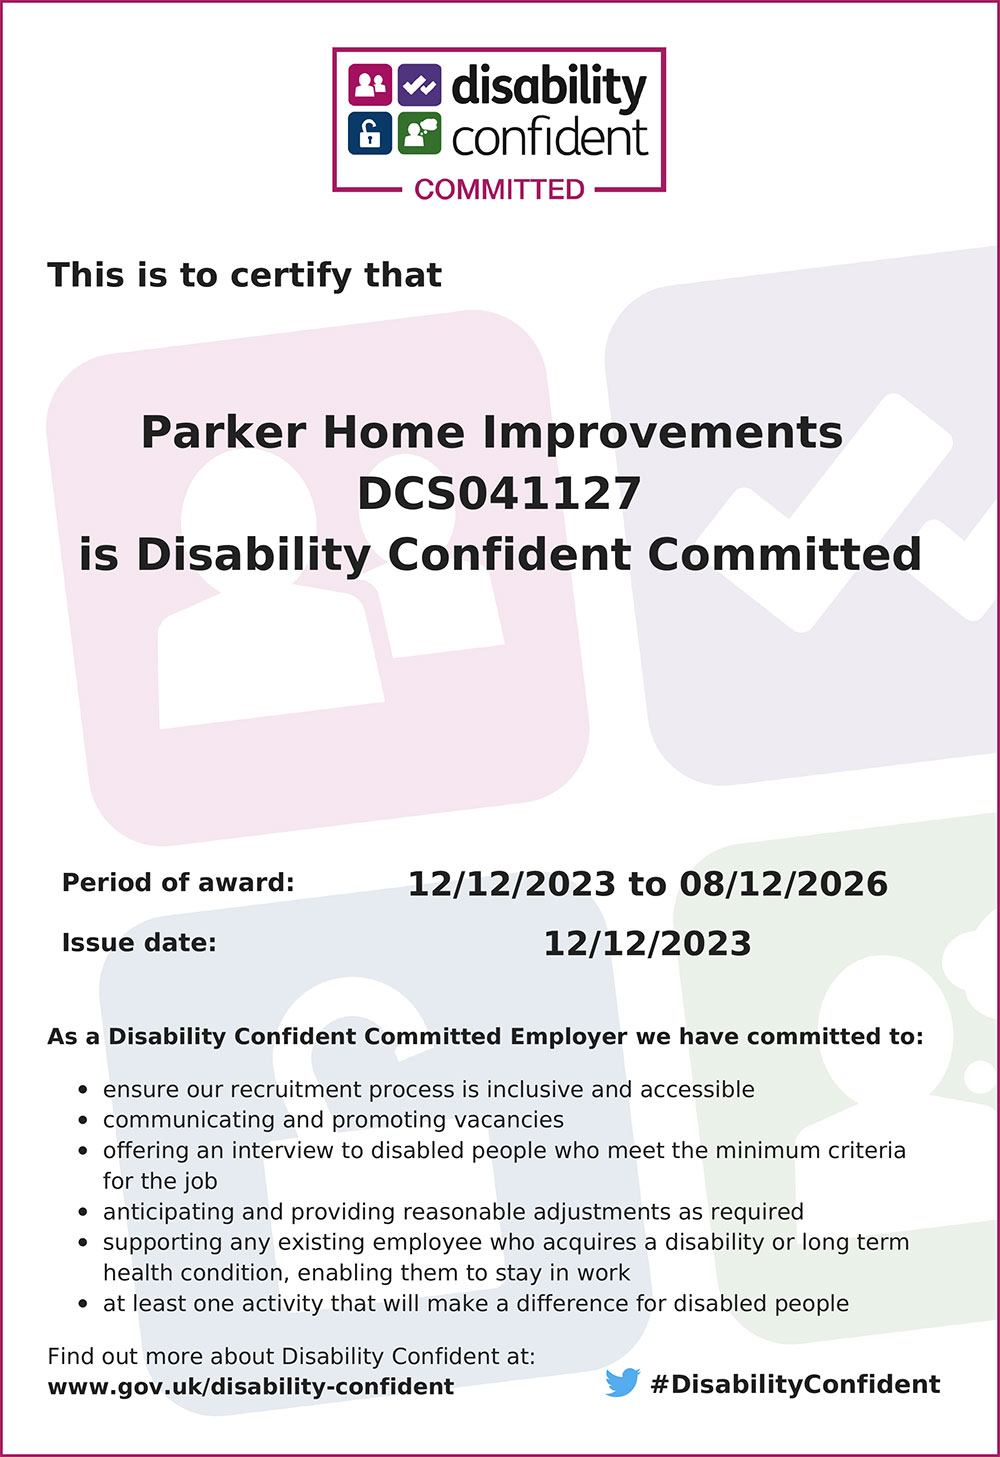 Disability-confident-committed